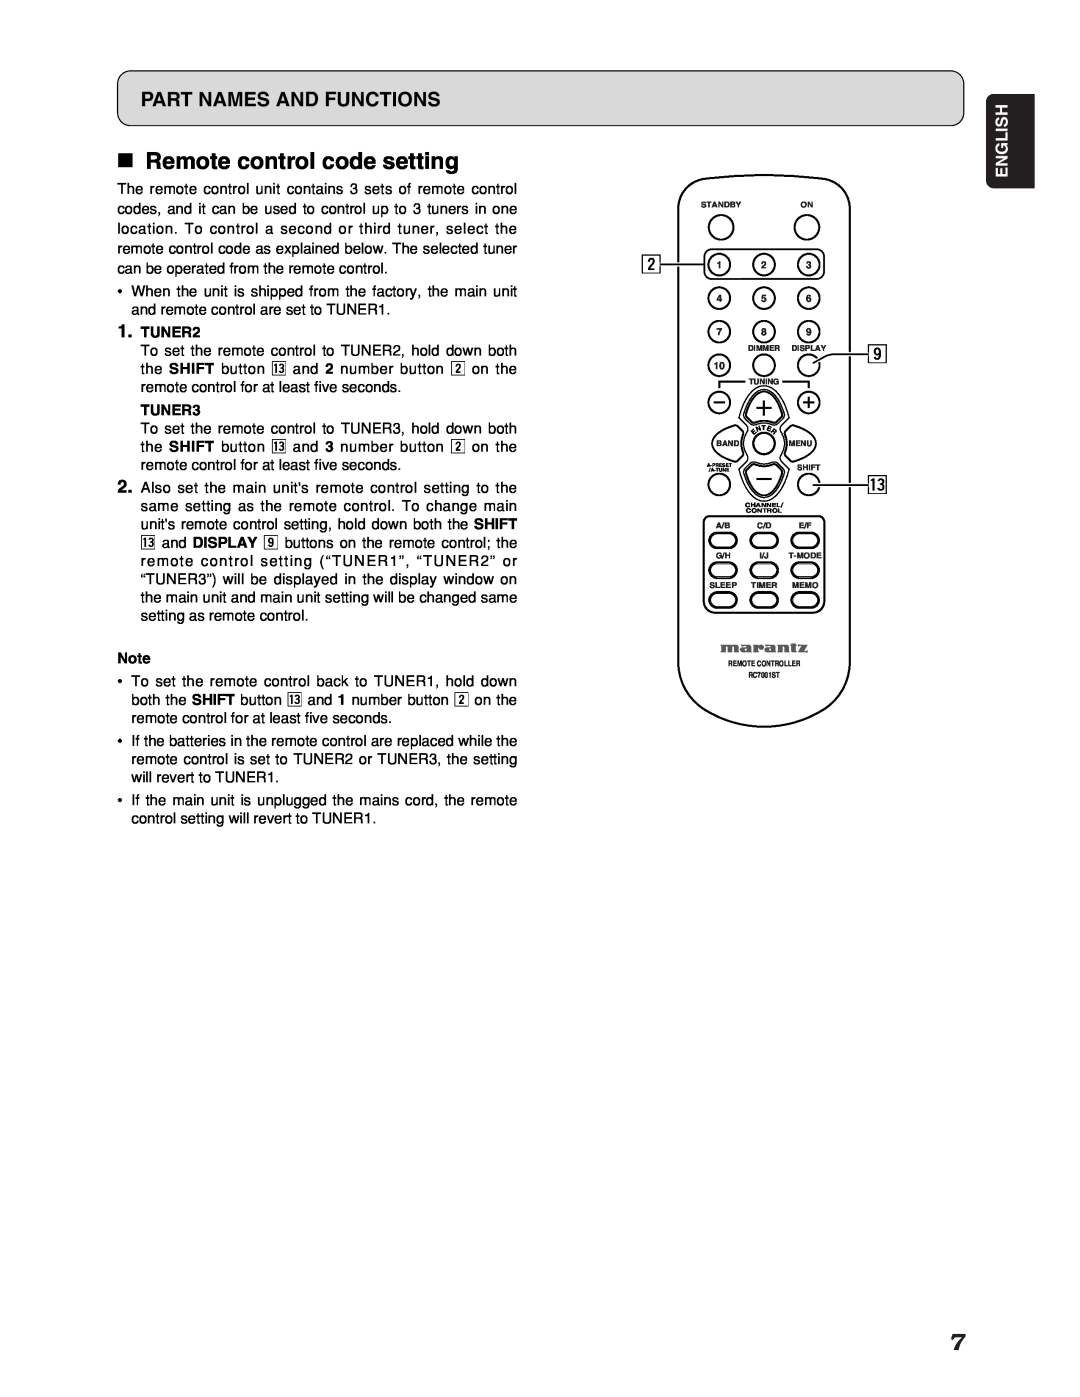 Marantz ST7001 manual Remote control code setting, Part Names And Functions, English, TUNER2, TUNER3 